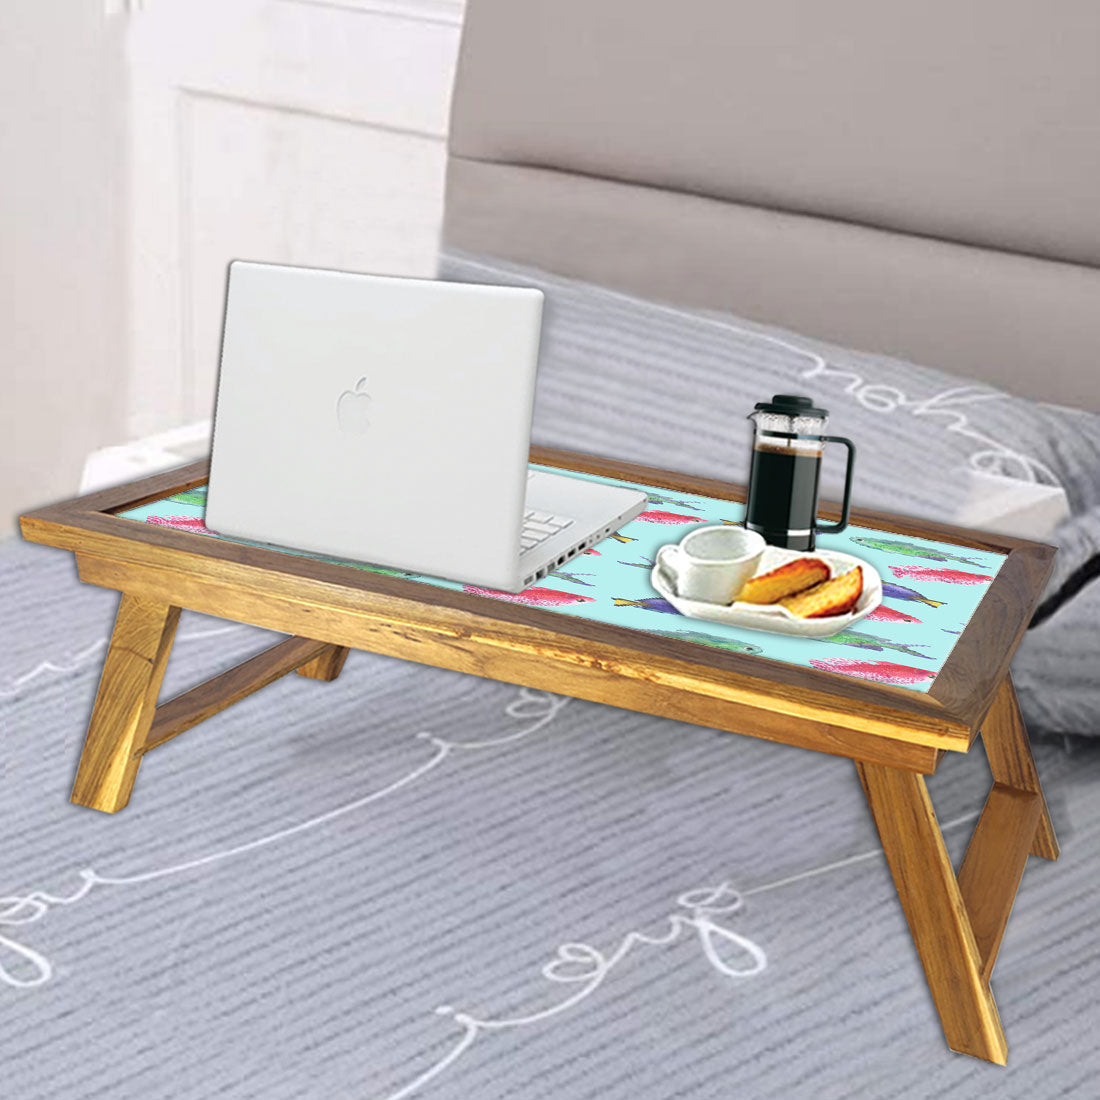 Folding Laptop Table for Home Bed Lapdesk Breakfast Tables Study Desk - Fishes Nutcase